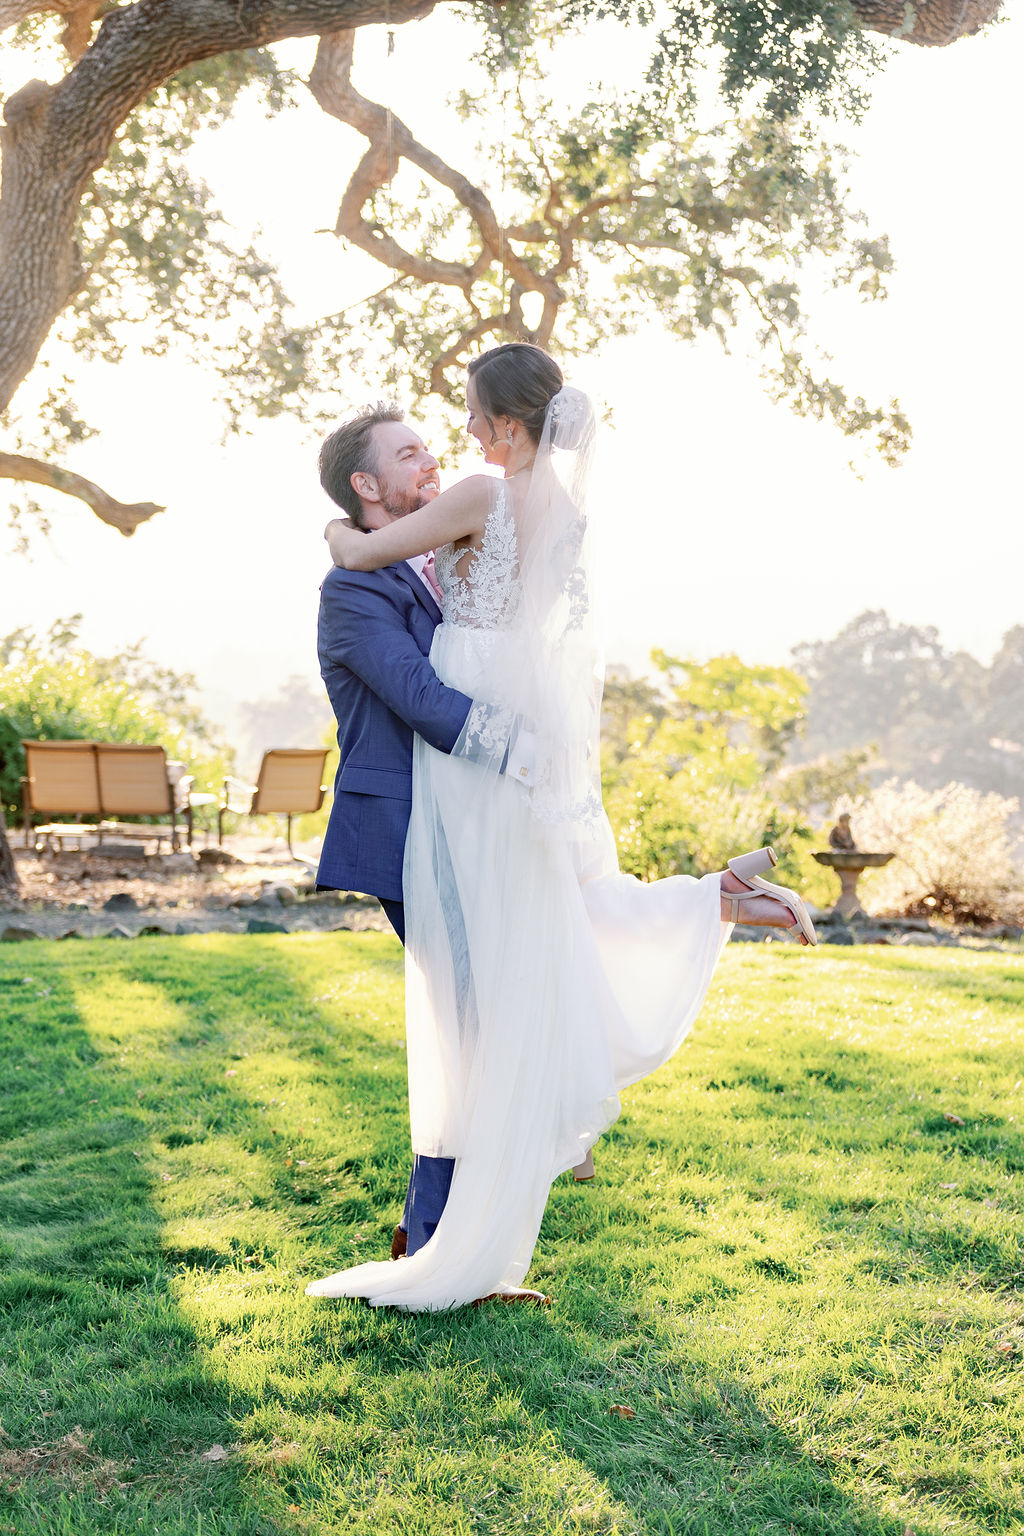 groom picks up his bride and twirls her around while the sun sets through the trees behind them while the shadows cast over them for California wedding